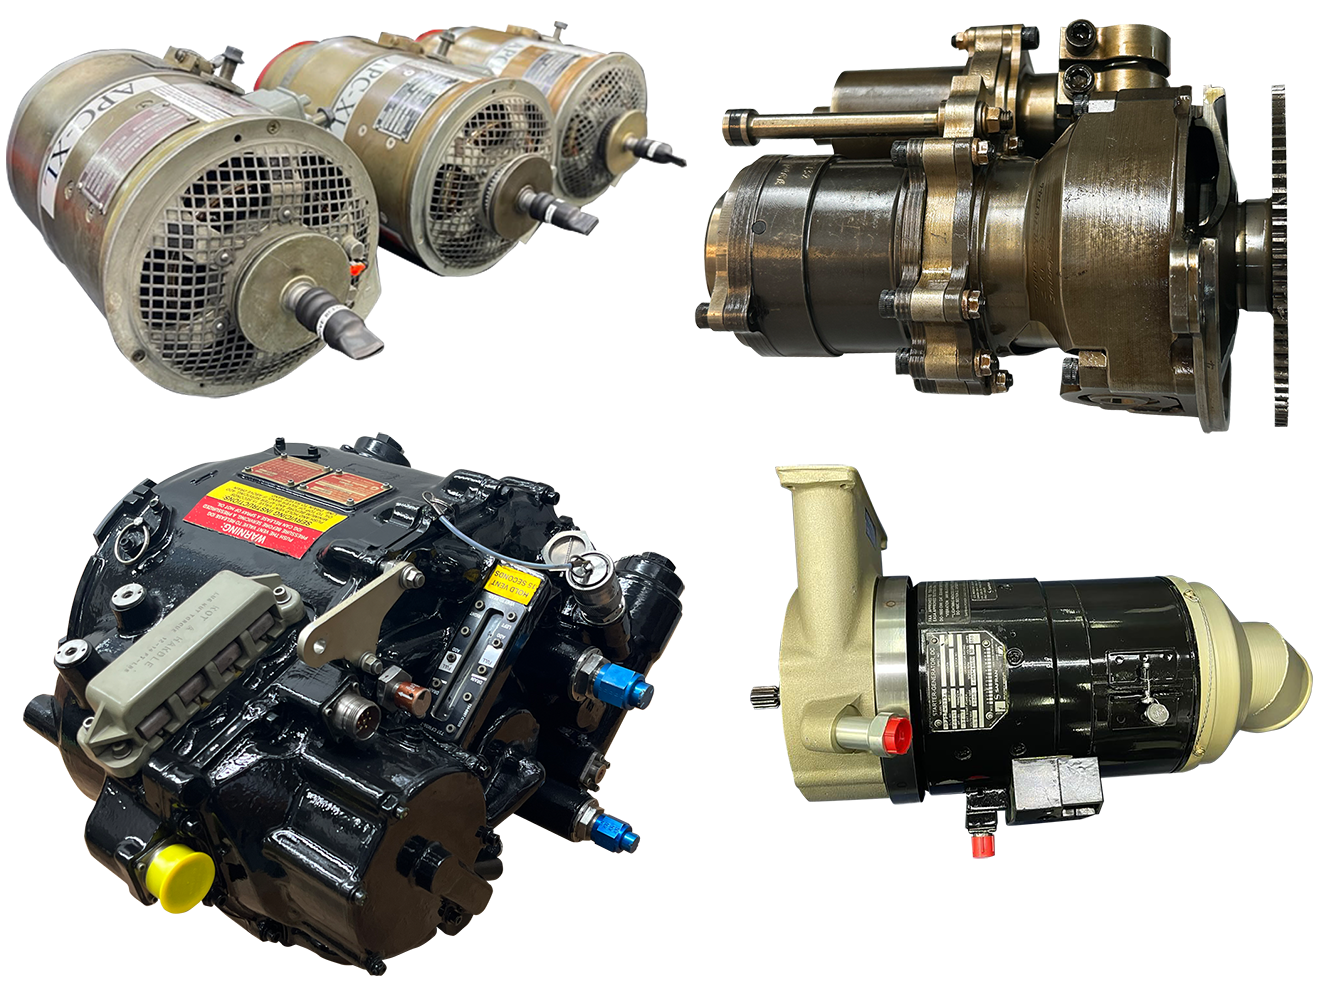 different types of power generation components for aircraft